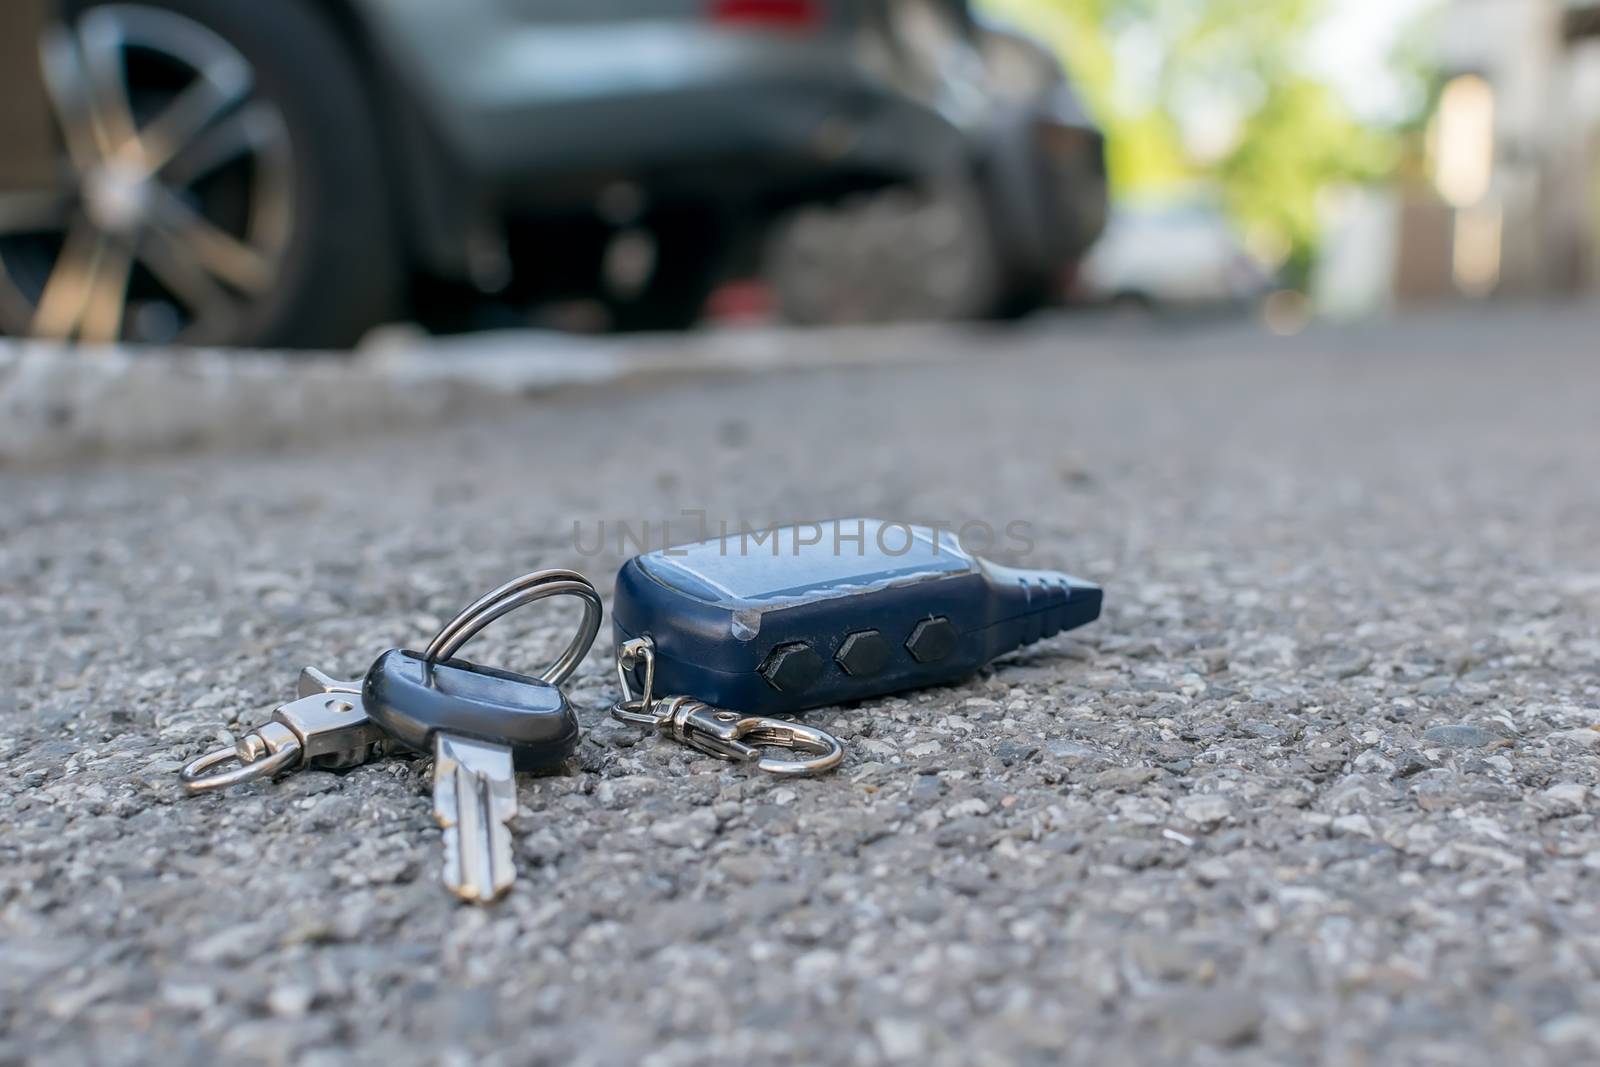 The lost keychain, car alarm remote, lies on the asphalted sidewalk of the road by jk3030